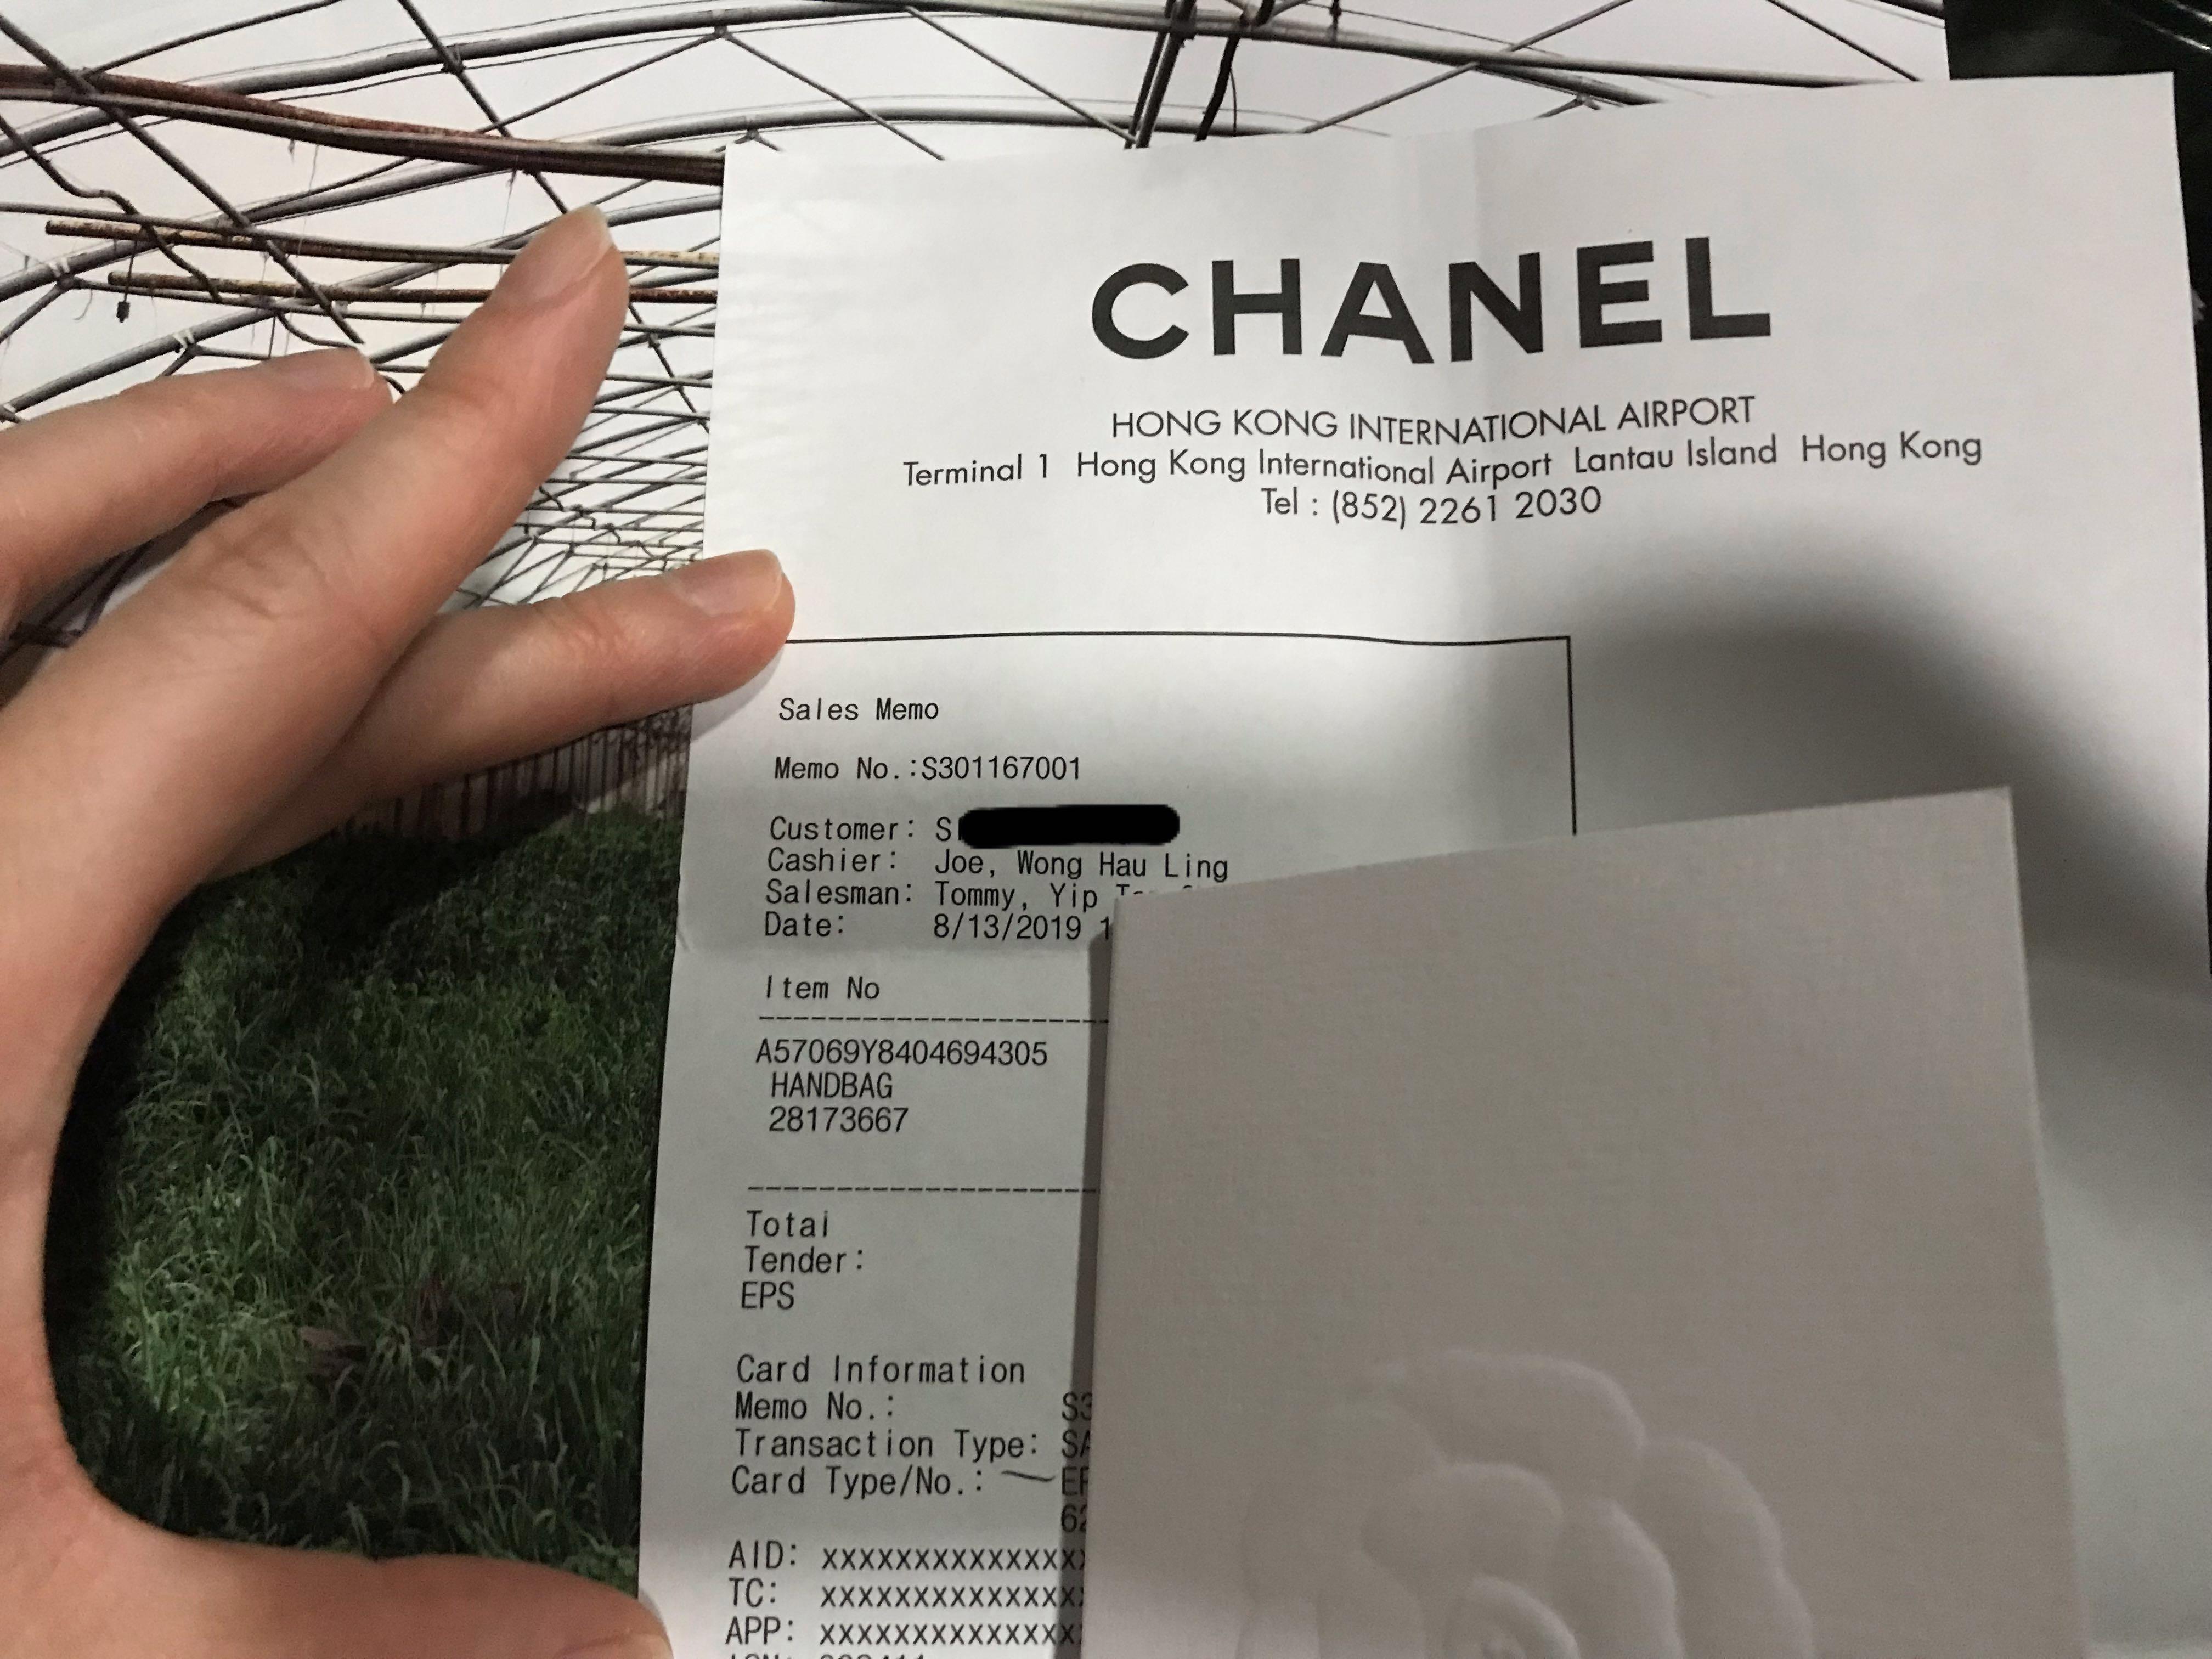 Faking it: sophisticated Chinese counterfeiters even create Hong Kong store  receipts to fool knock-off luxury goods buyers